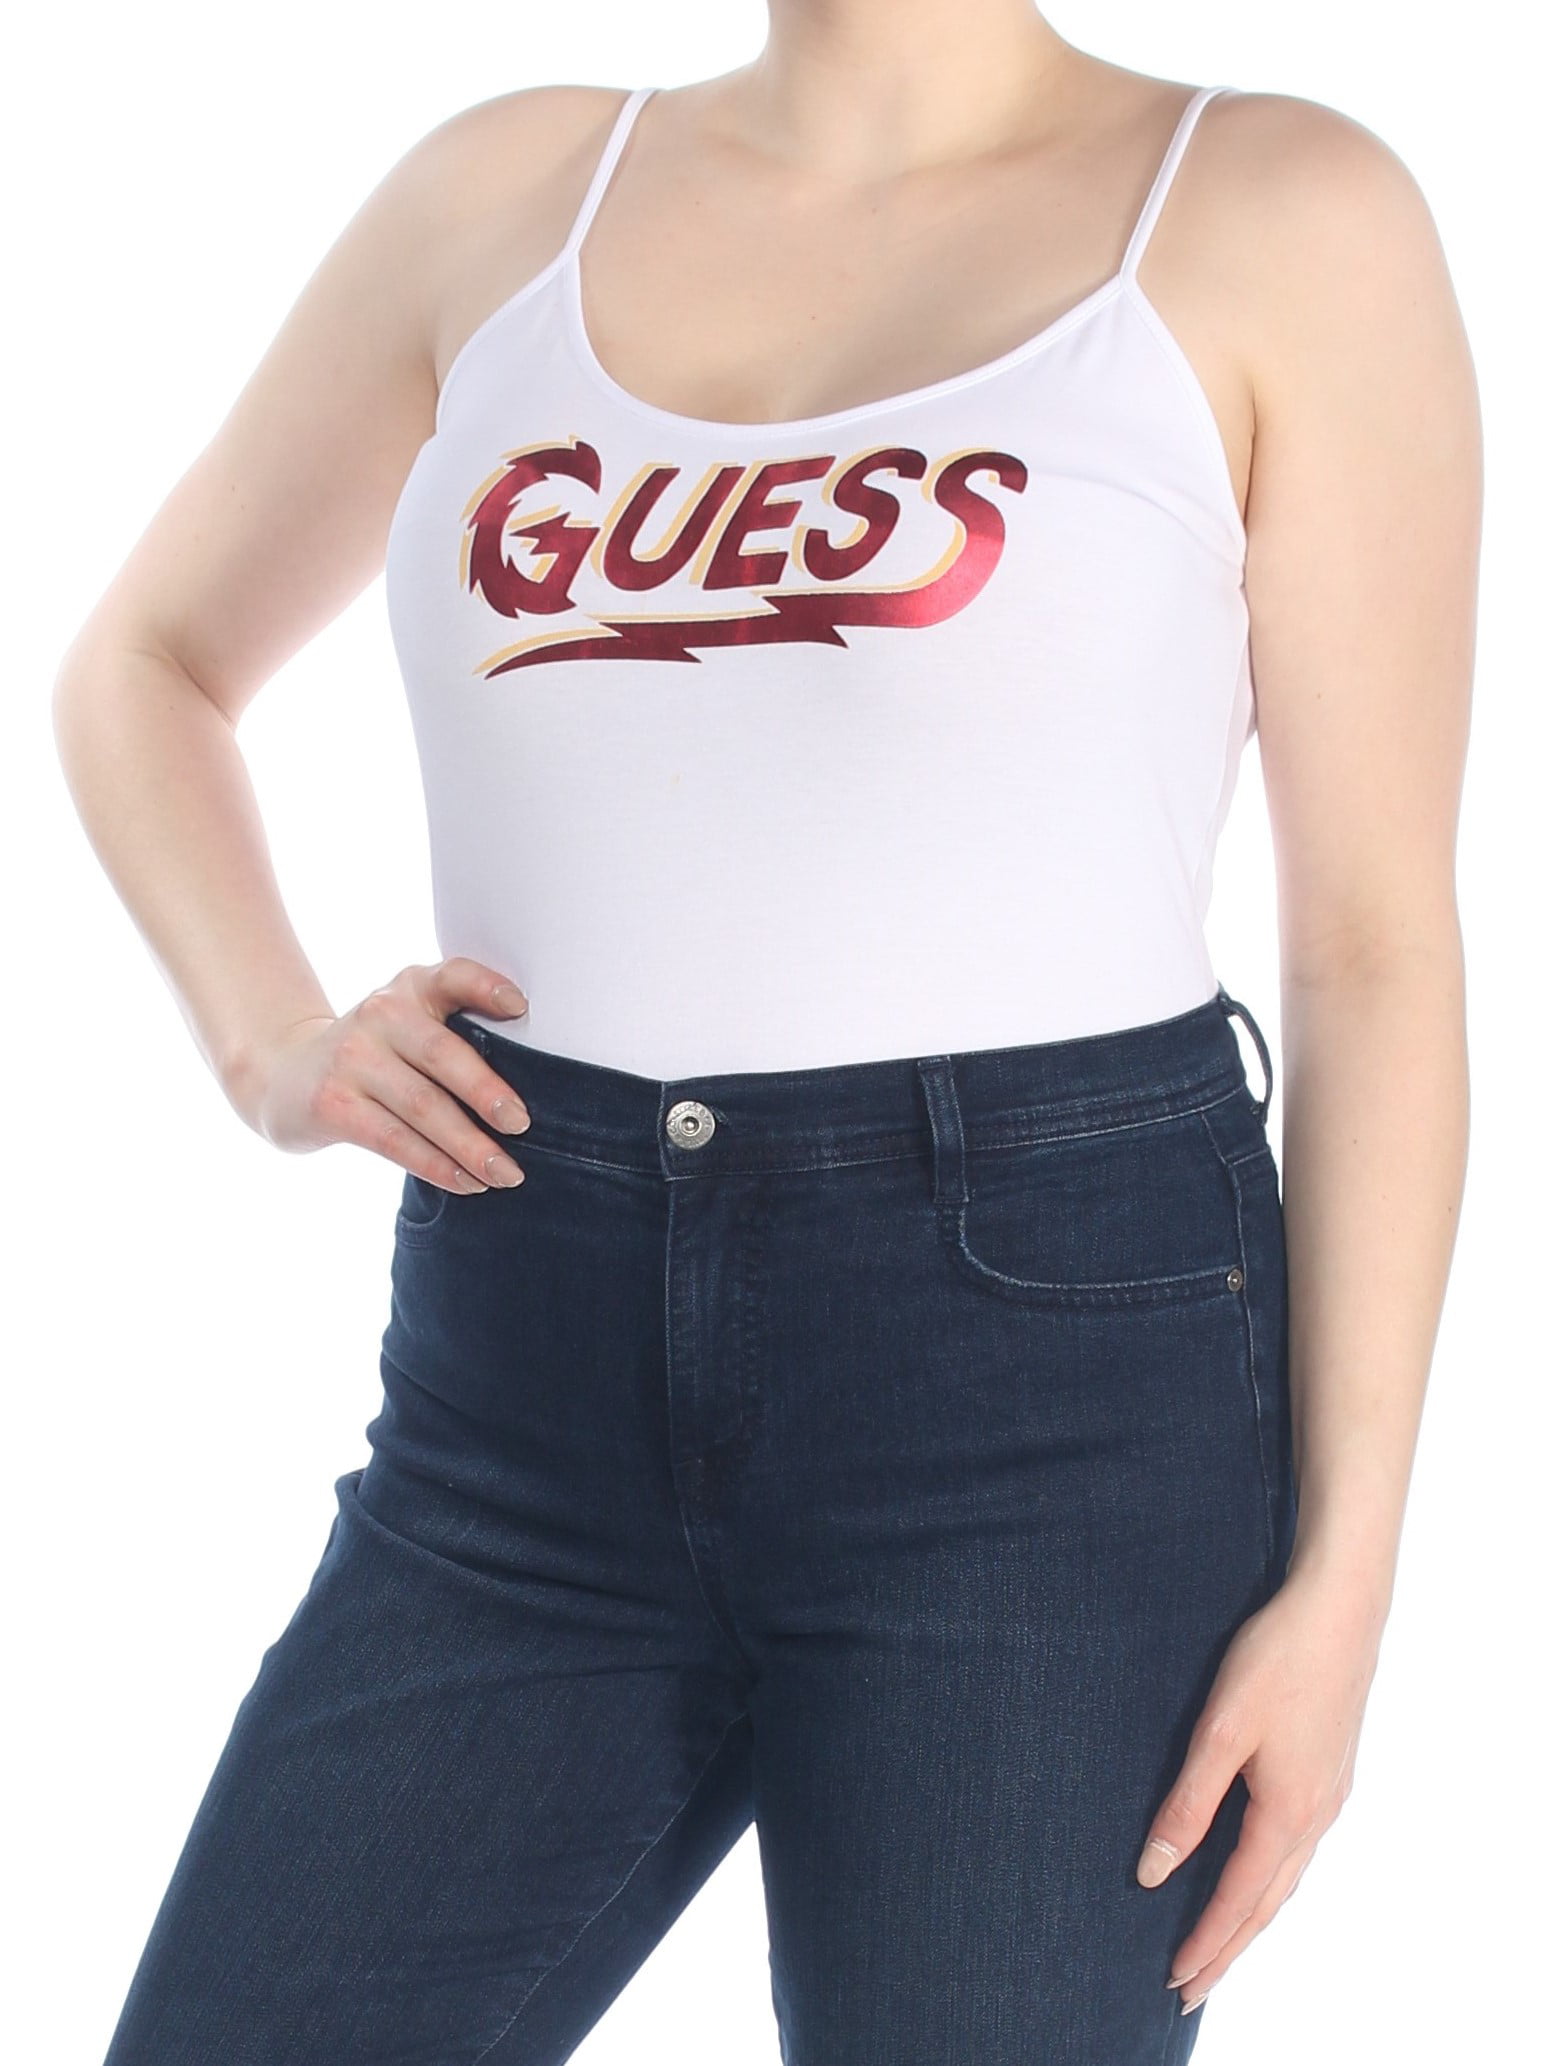 GUESS Womens Sleeveless Charged Bodysuit W82I69R49A2